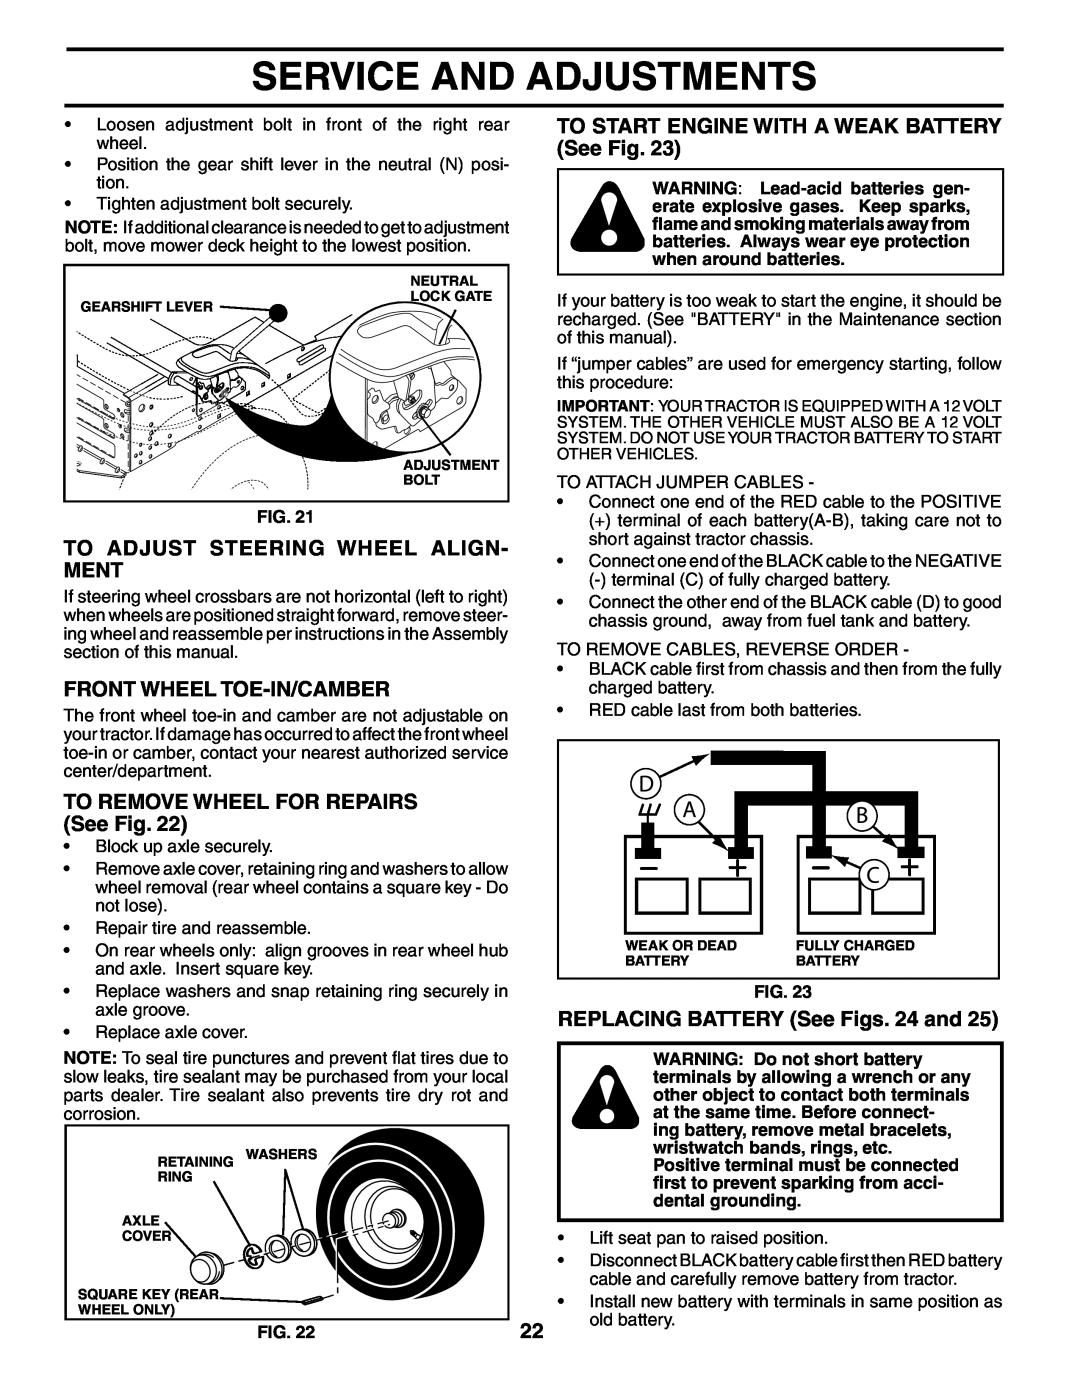 Poulan 195506 manual To Adjust Steering Wheel Align- Ment, Front Wheel Toe-In/Camber, TO REMOVE WHEEL FOR REPAIRS See Fig 